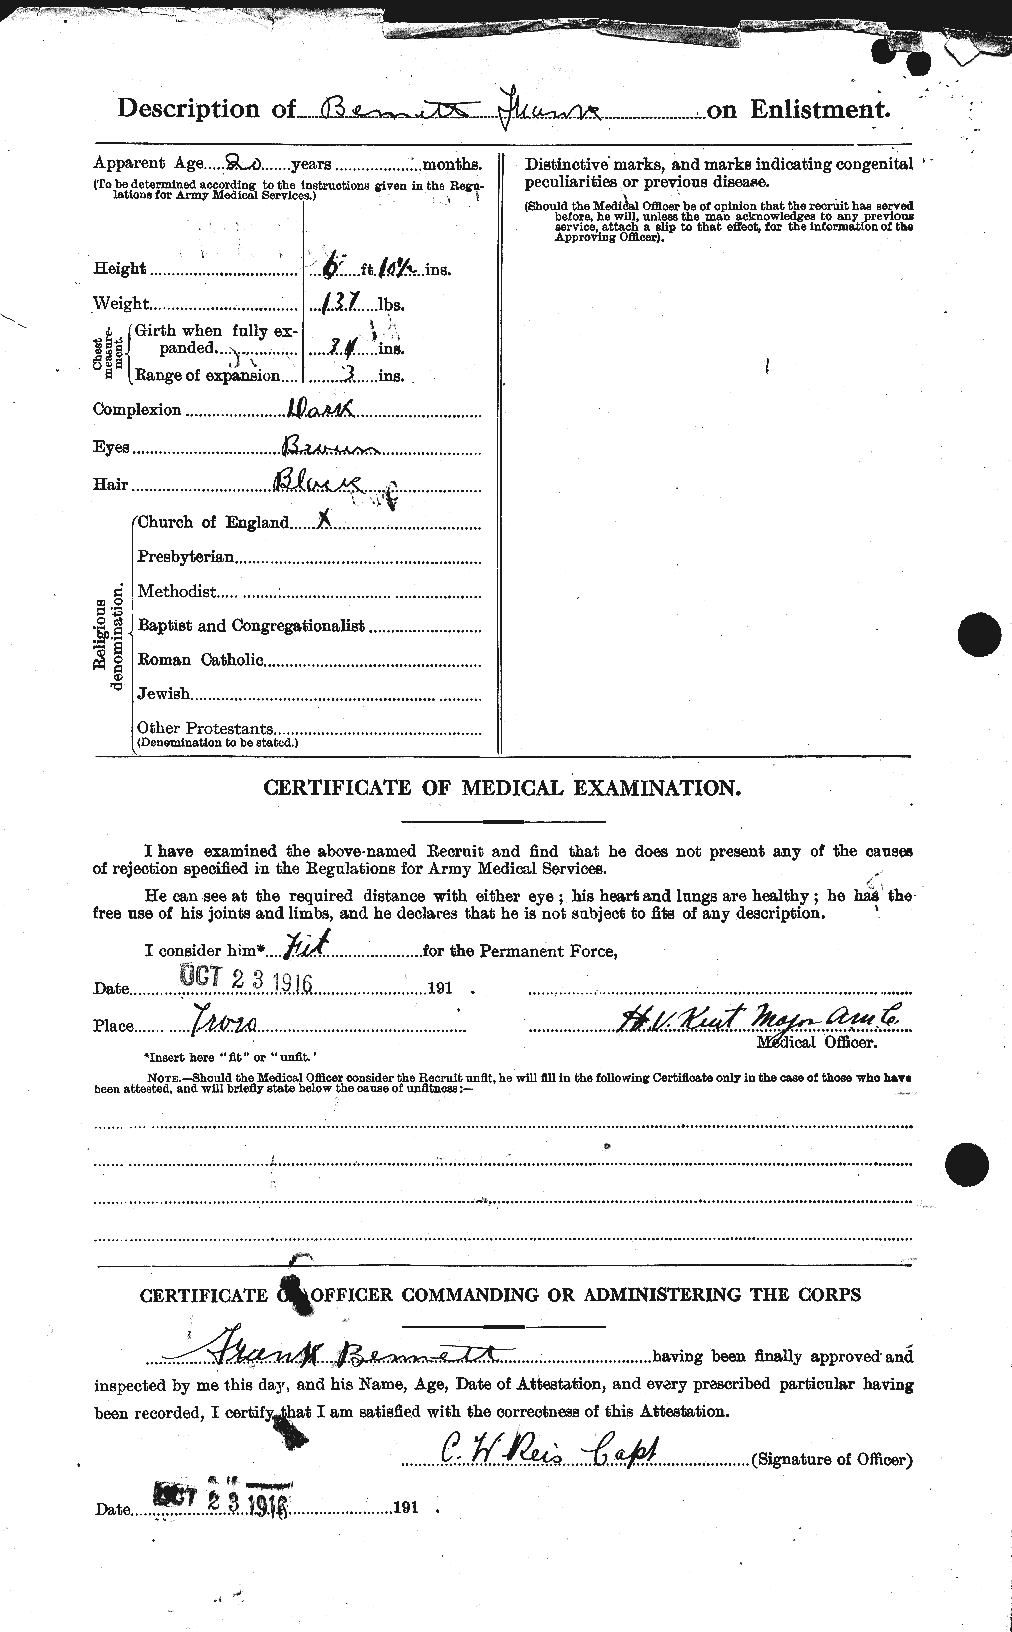 Personnel Records of the First World War - CEF 233499b